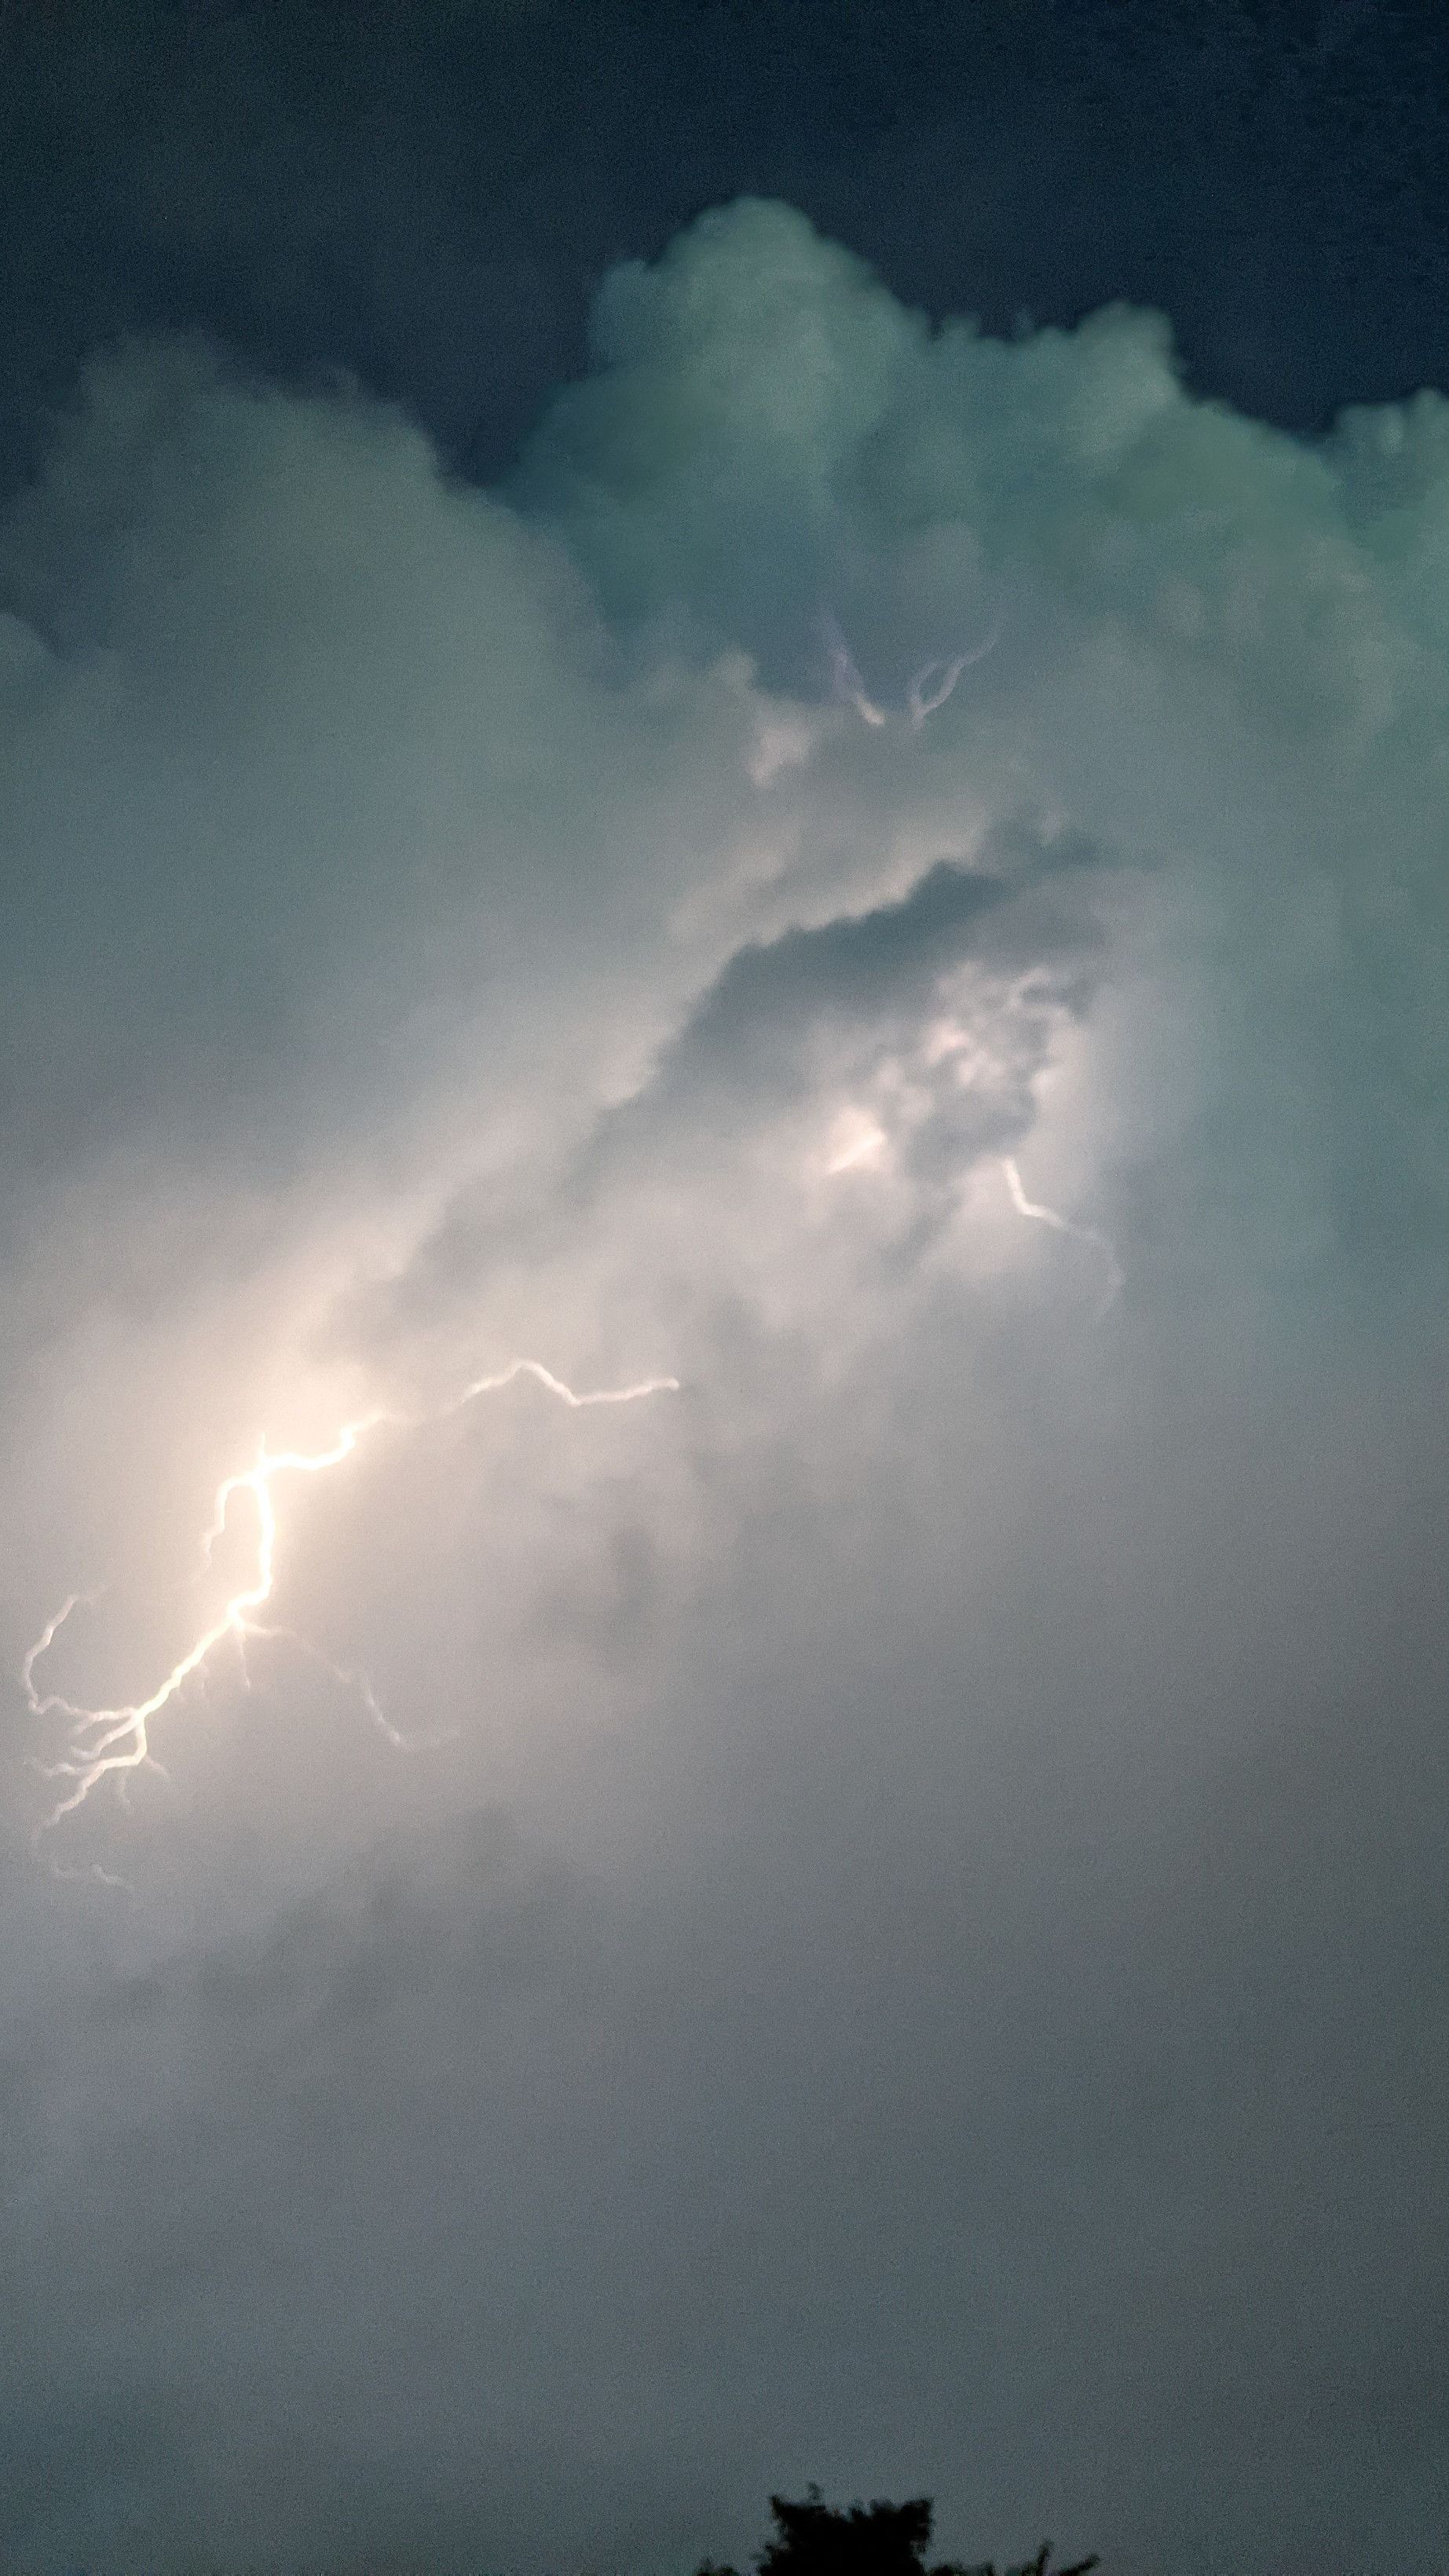 Woman hit by lightning ahead of severe thunderstorm